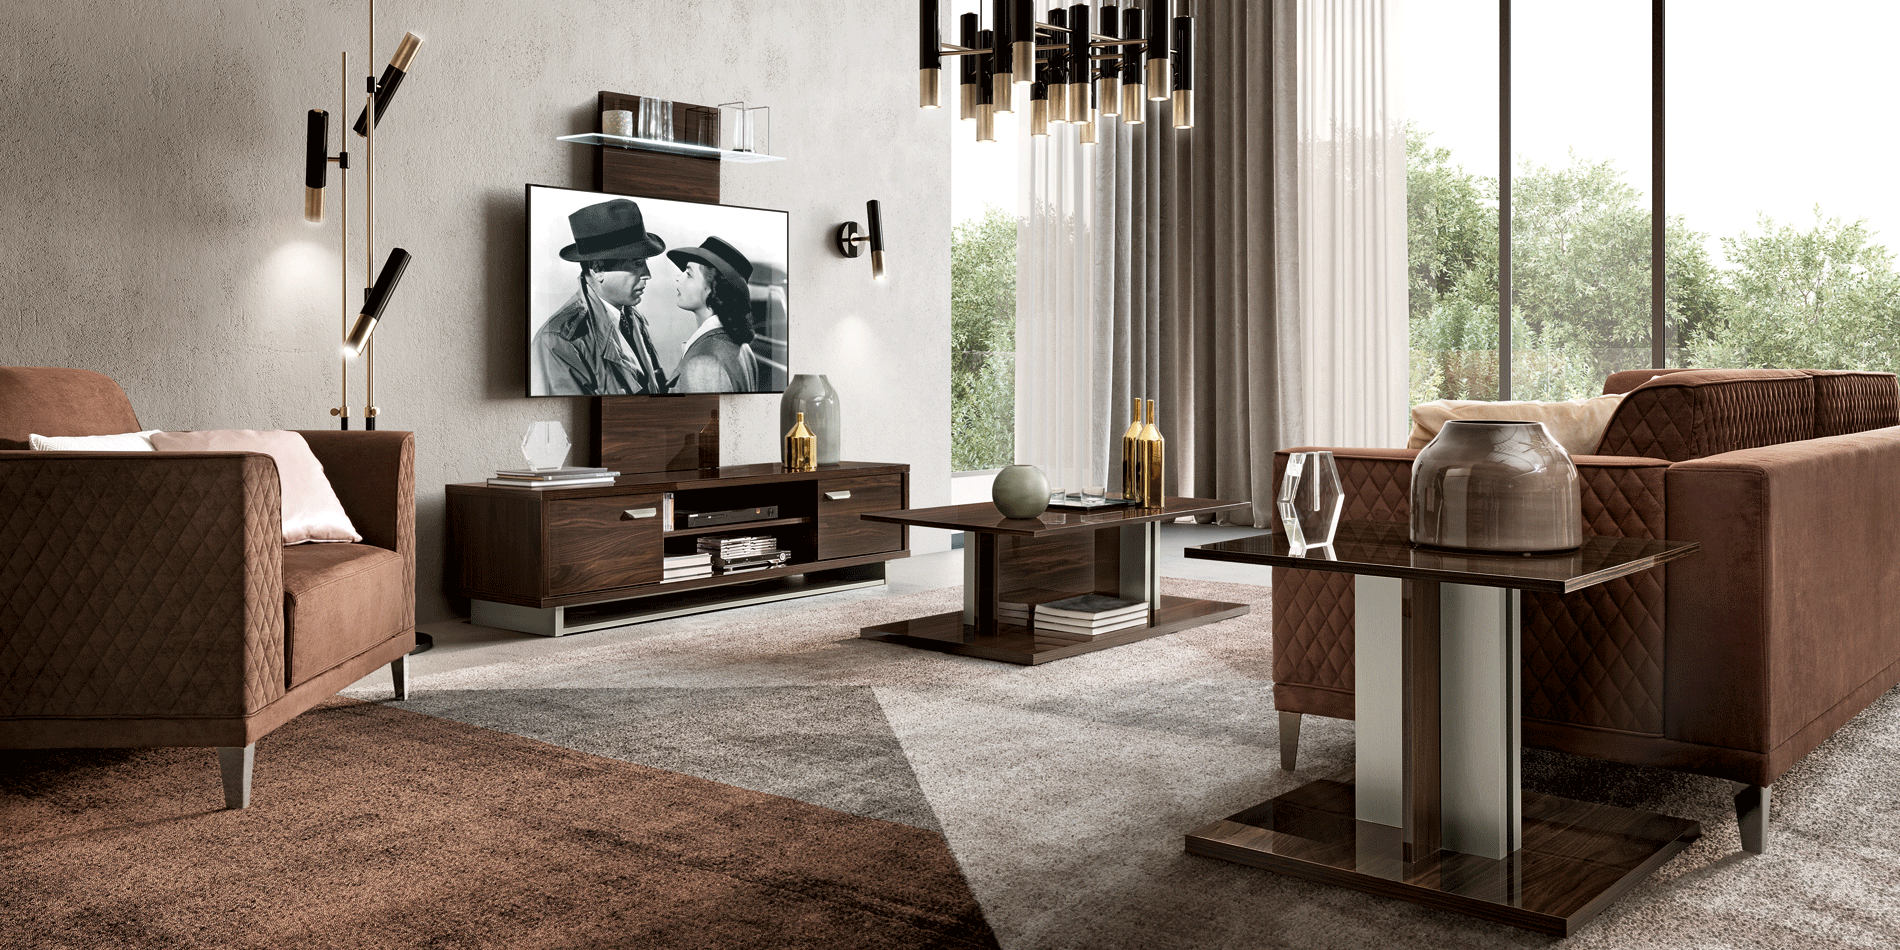 Brands Camel Gold Collection, Italy Volare Entertainment center Dark Walnut/Nickel Additional items